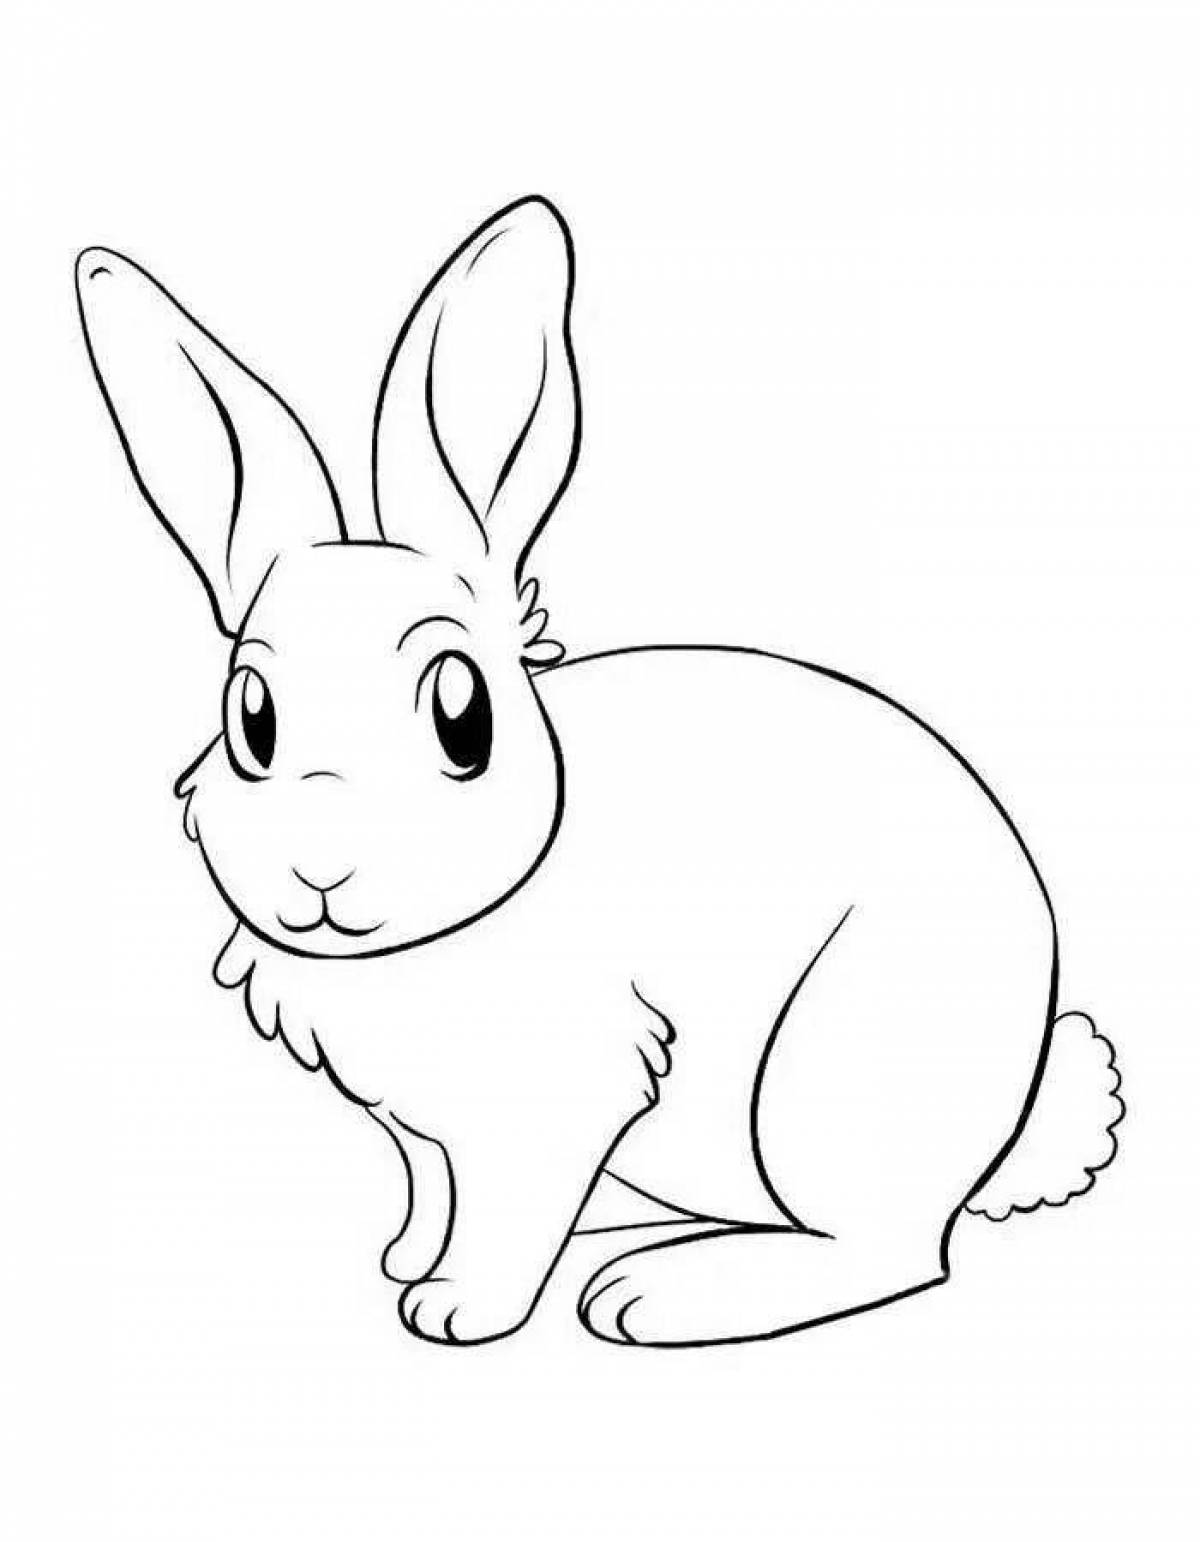 Playful coloring drawing of a hare for children